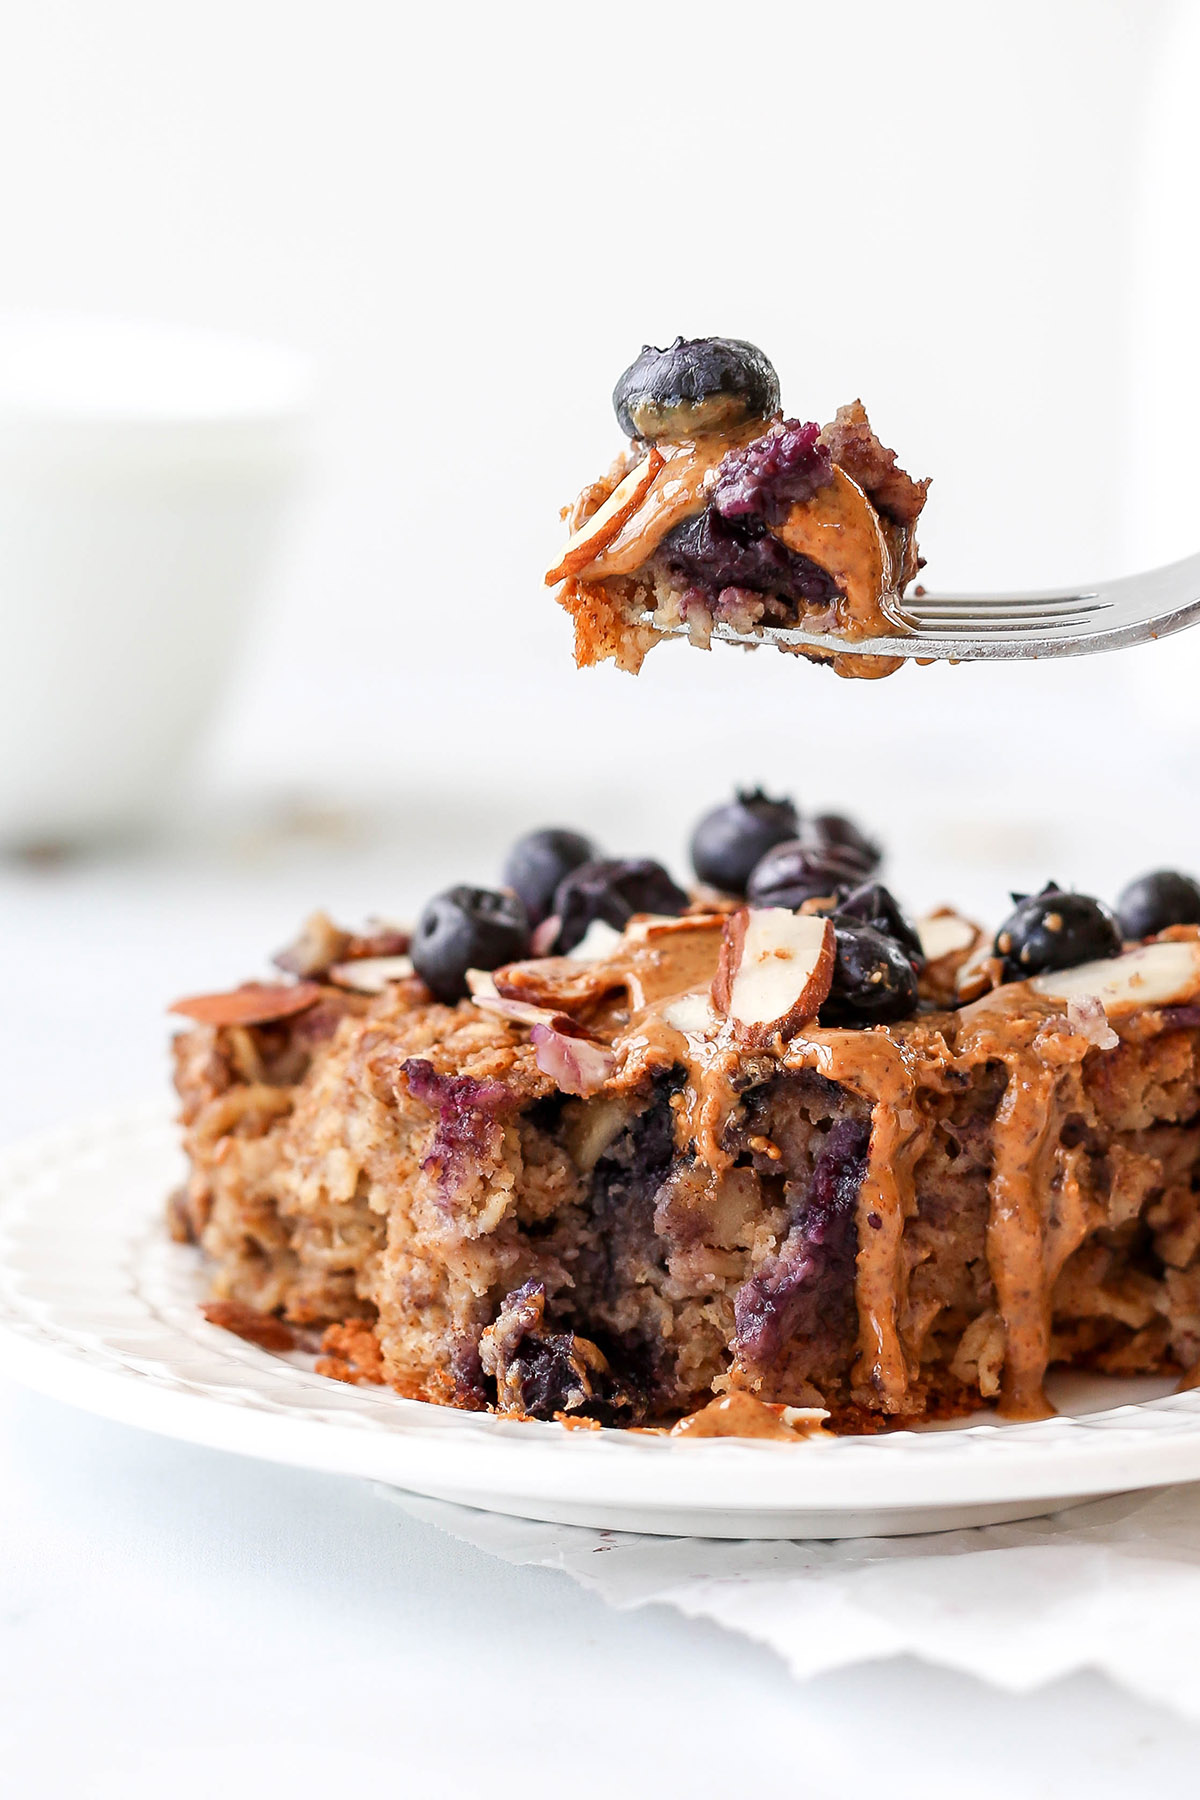 a fork digging into blueberry baked oatmeal.